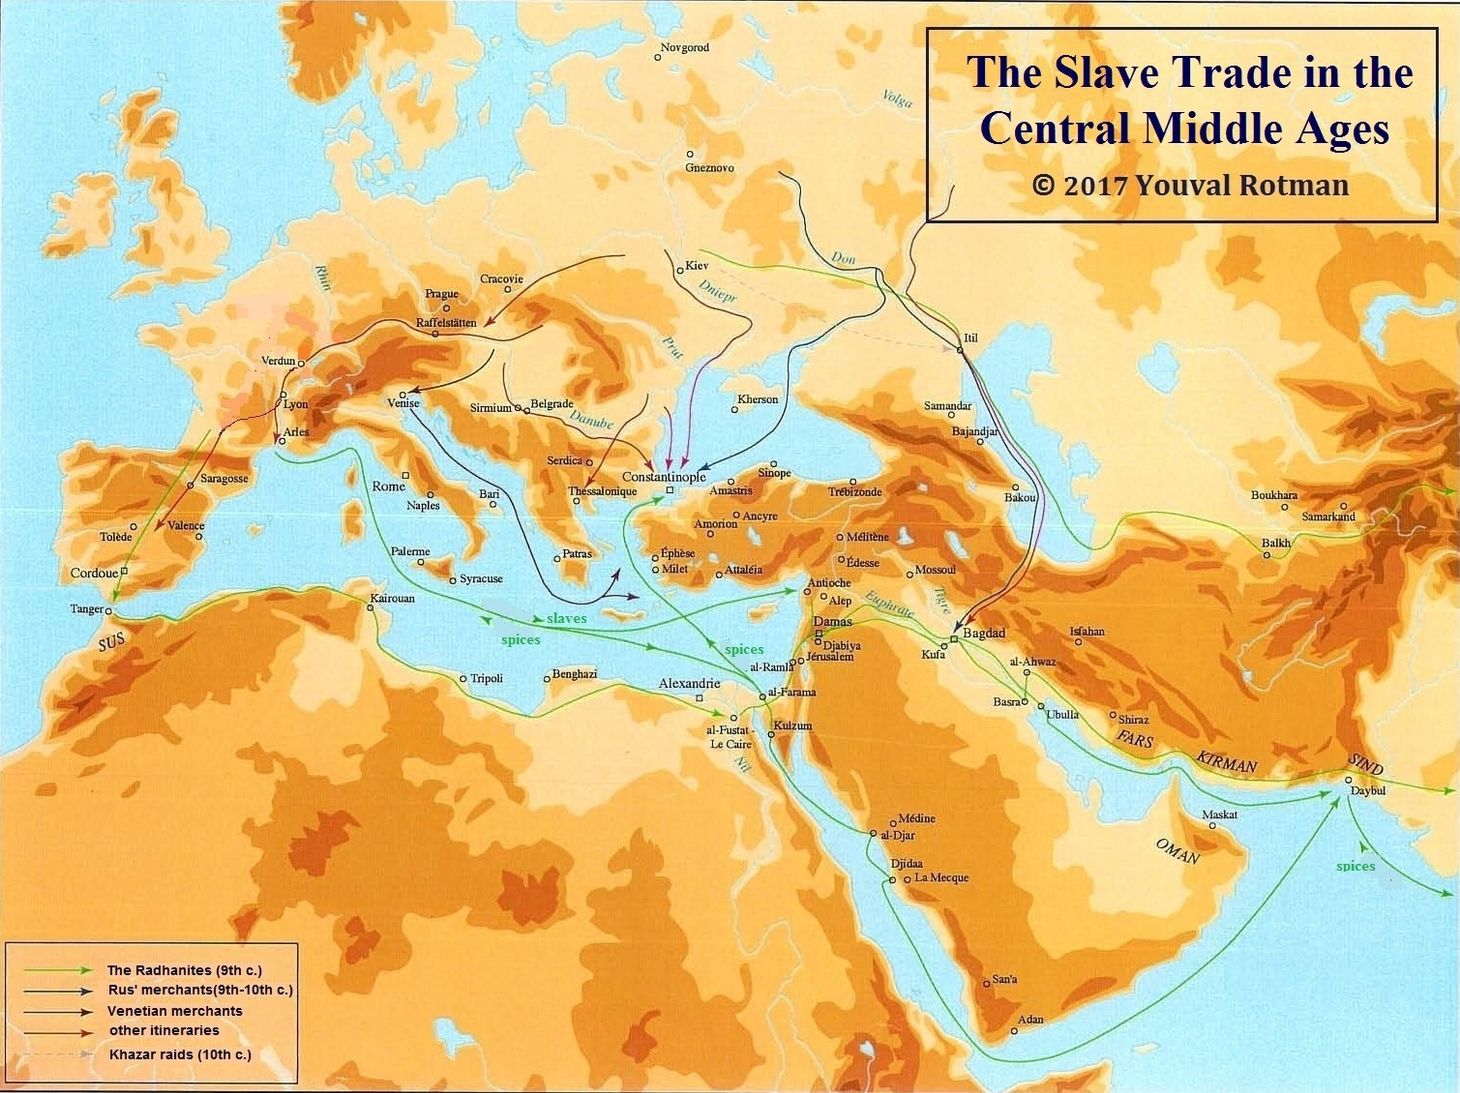 From Dublin to Shandong: Slavery and Slaving in Afroeurasia before 1400 C.E.